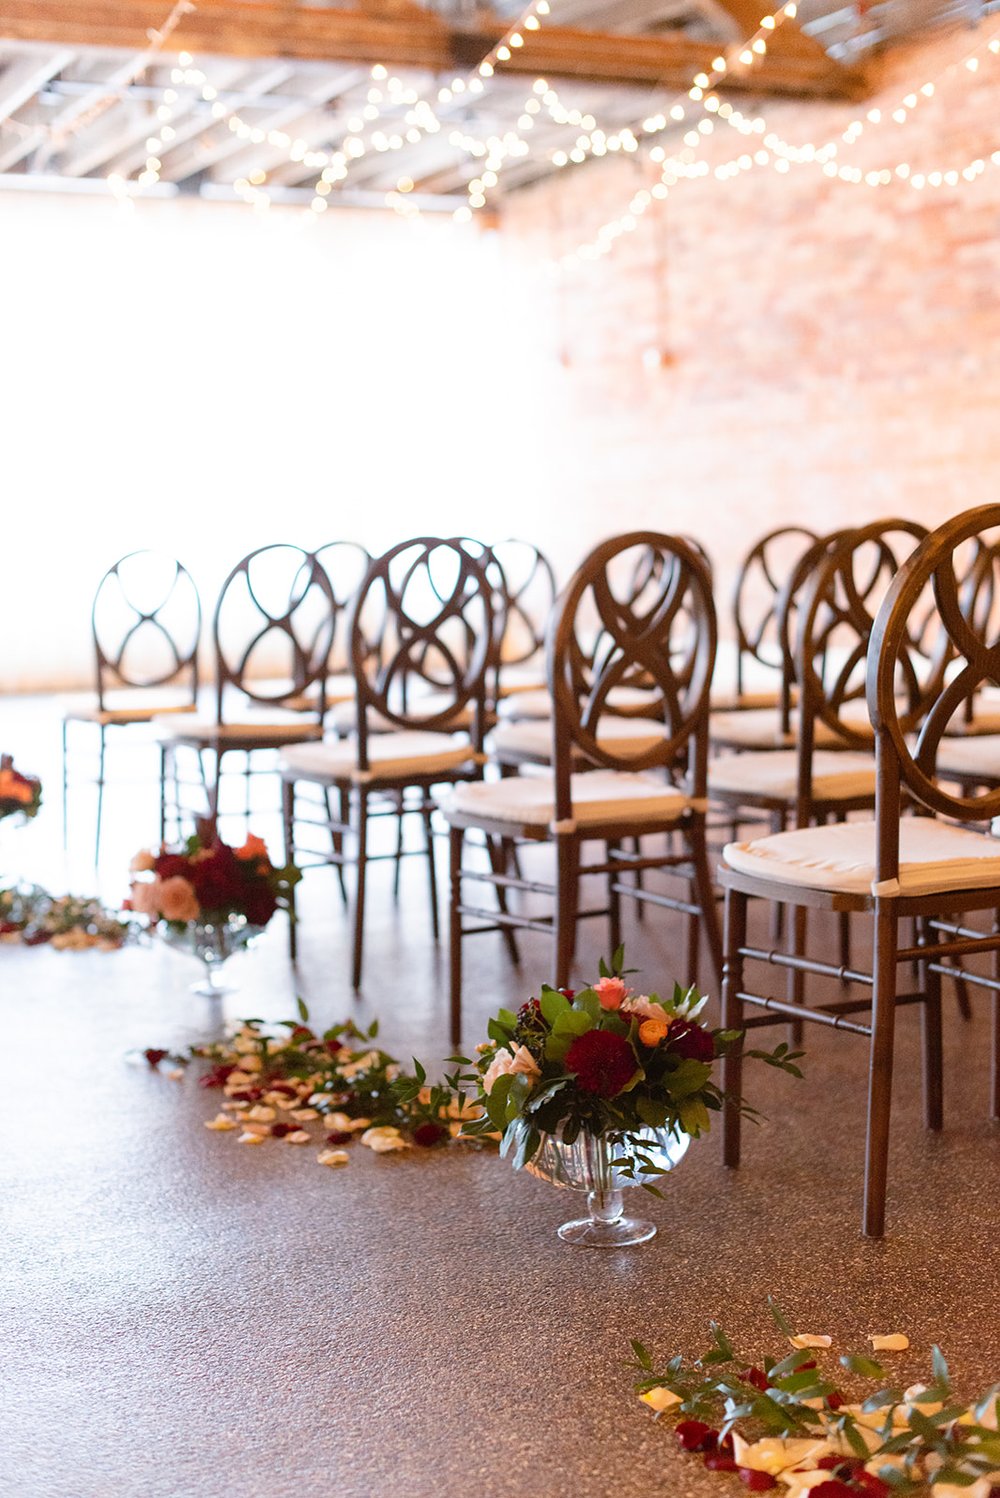 aisle of the venue for a fall wedding with flowers and chairs